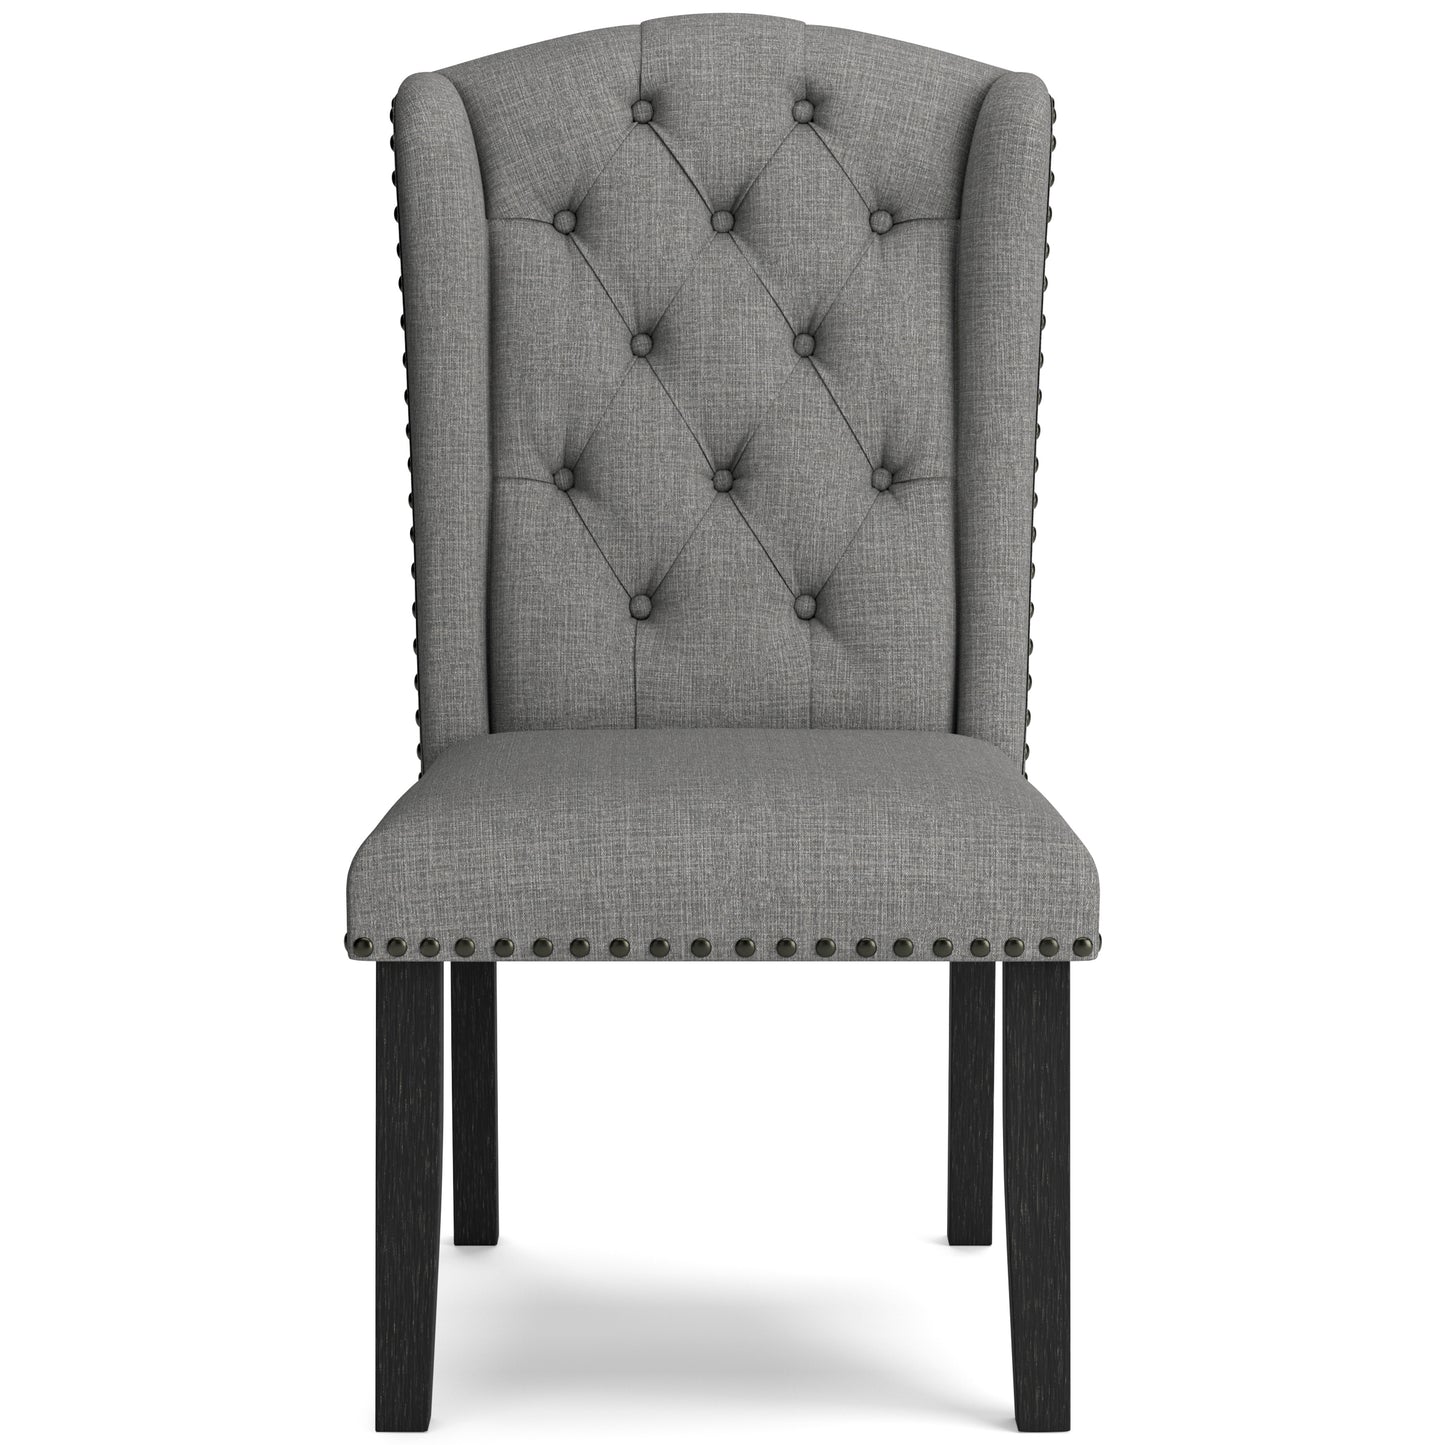 JEANETTE DINING CHAIR - GRAY